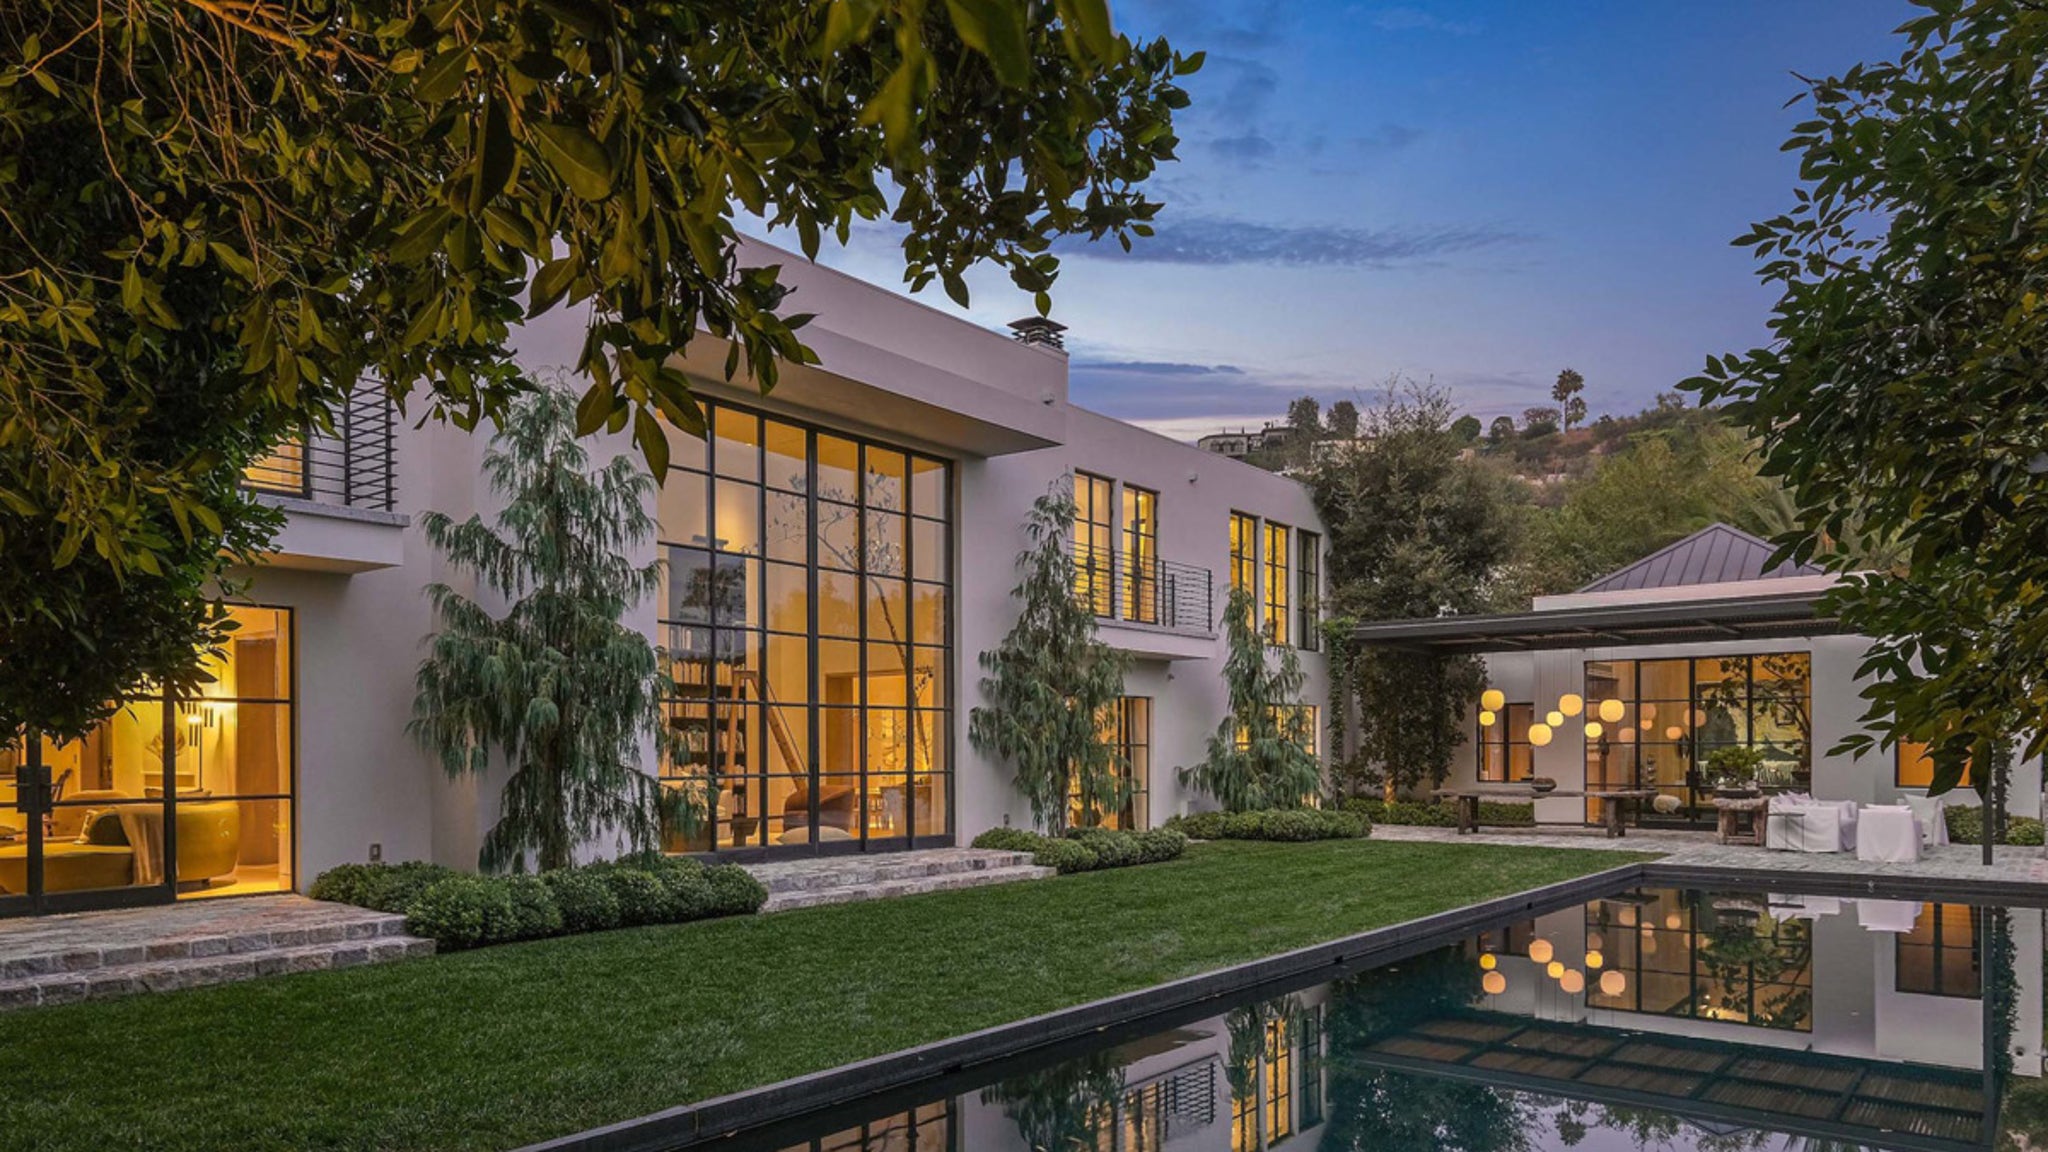 Tinder Co-Founder Sean Rad Lists Los Angeles Home For $28.5 Million